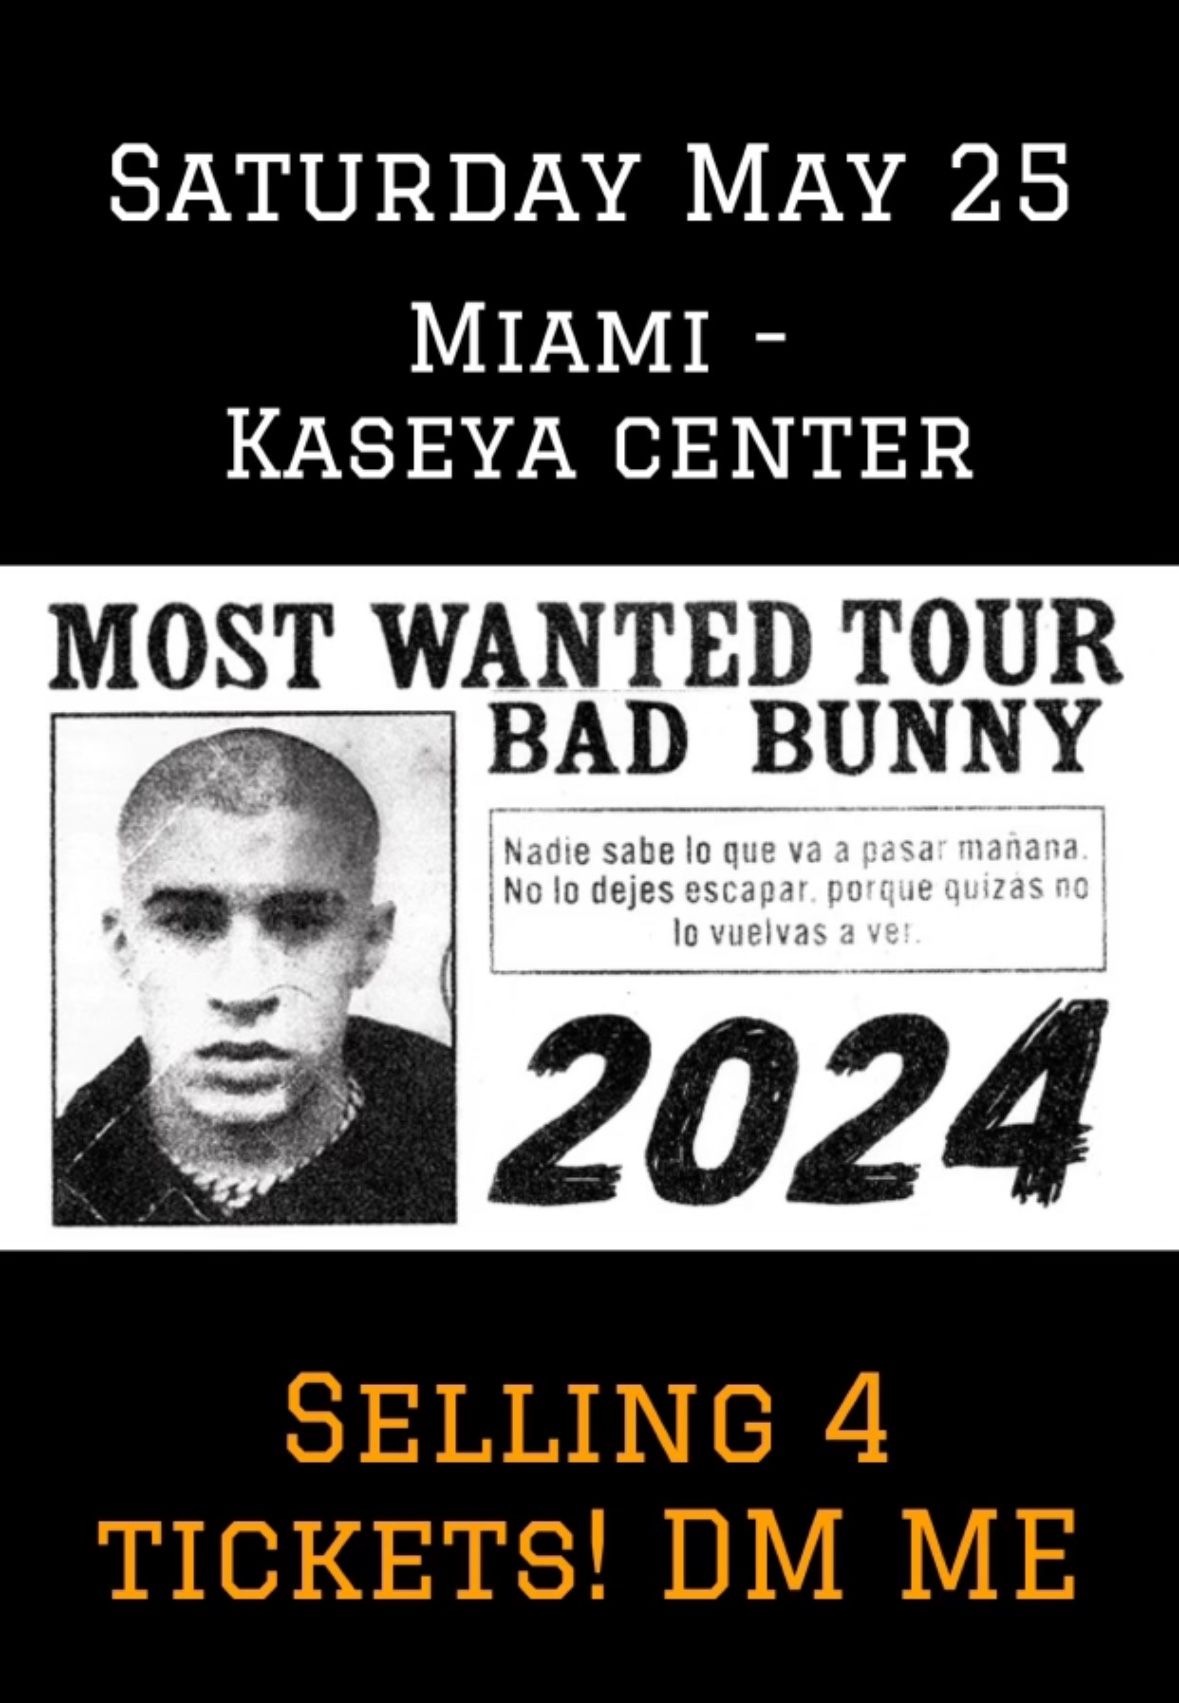 Bad Bunny - Most Wanted Tour in Miami, FL on May 25, 2024 (Saturday).